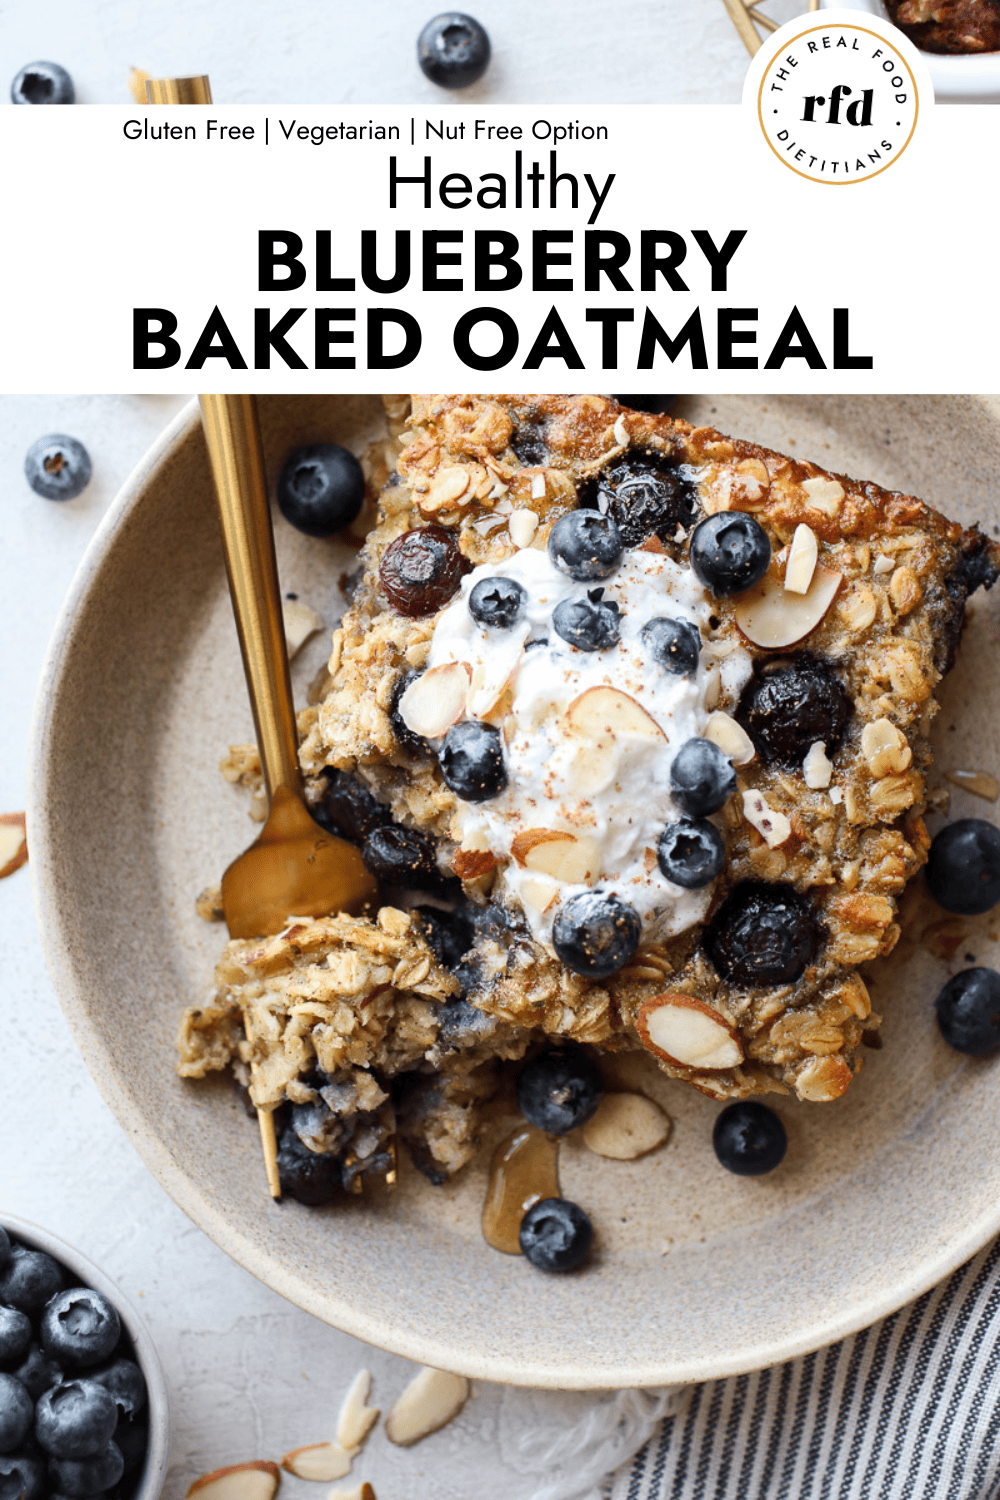 https://therealfooddietitians.com/wp-content/uploads/2023/07/Healthy-Blueberry-Baked-Oatmeal-1000-%C3%97-1500-px.png